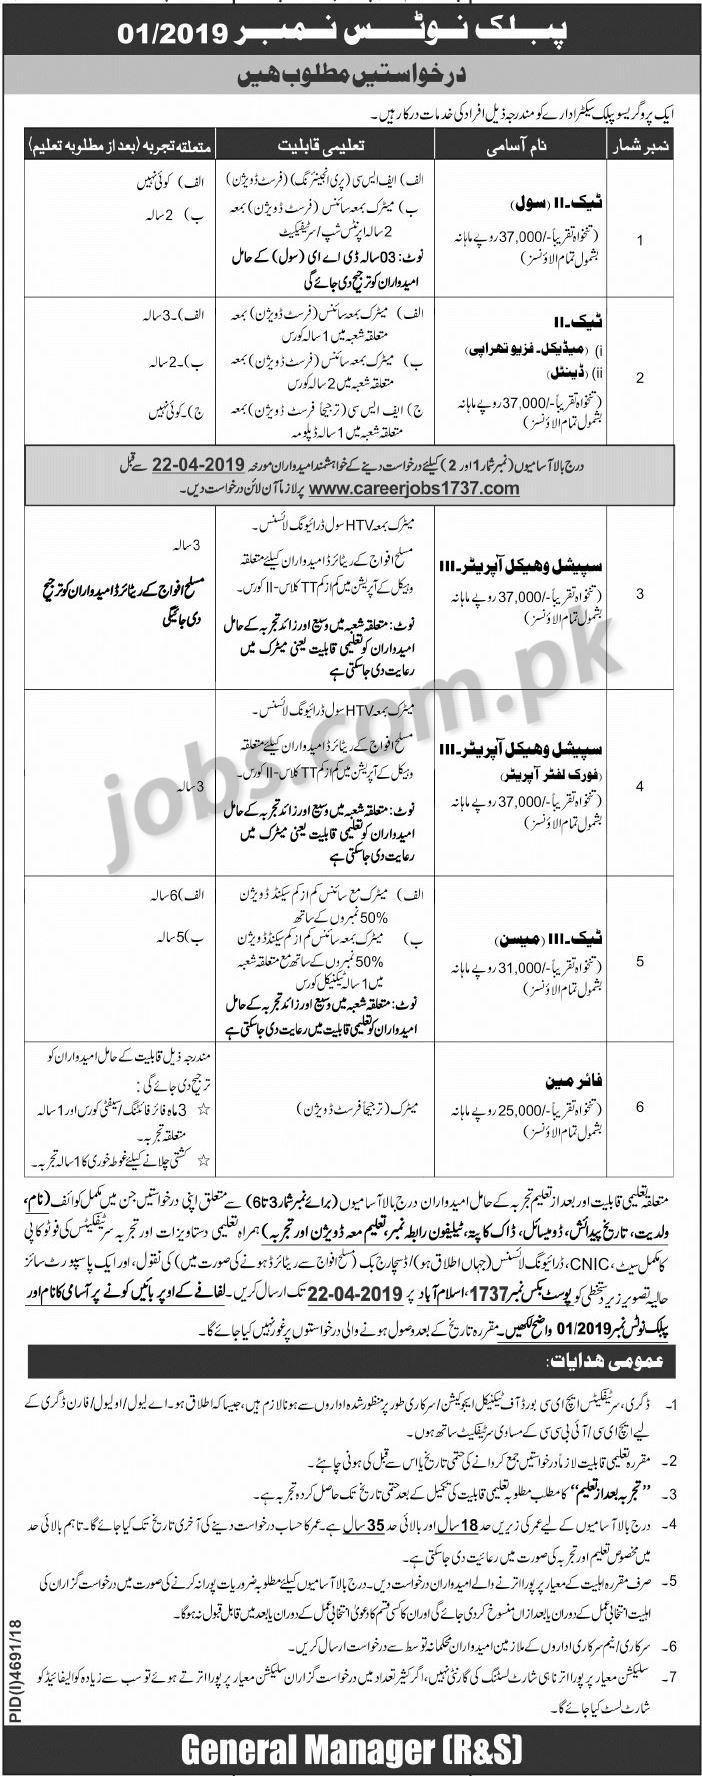 PO Box 1737 Federal Govt Organization Jobs 2019 for Tech-II / III, Fireman and Special Vehicle Operators